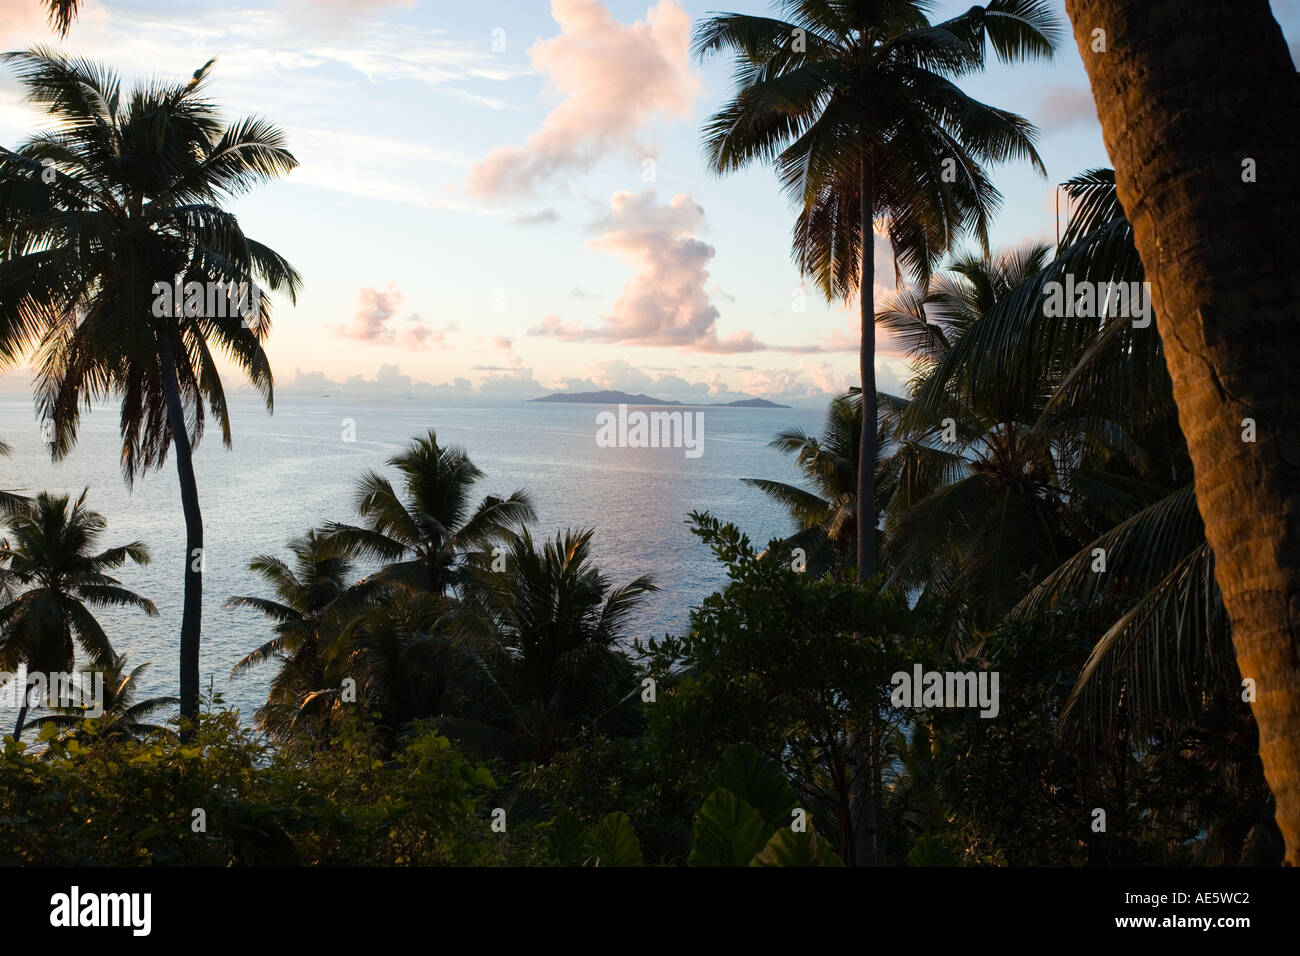 View of beach through coconut palms Property released Fregate Island Seychelles Stock Photo